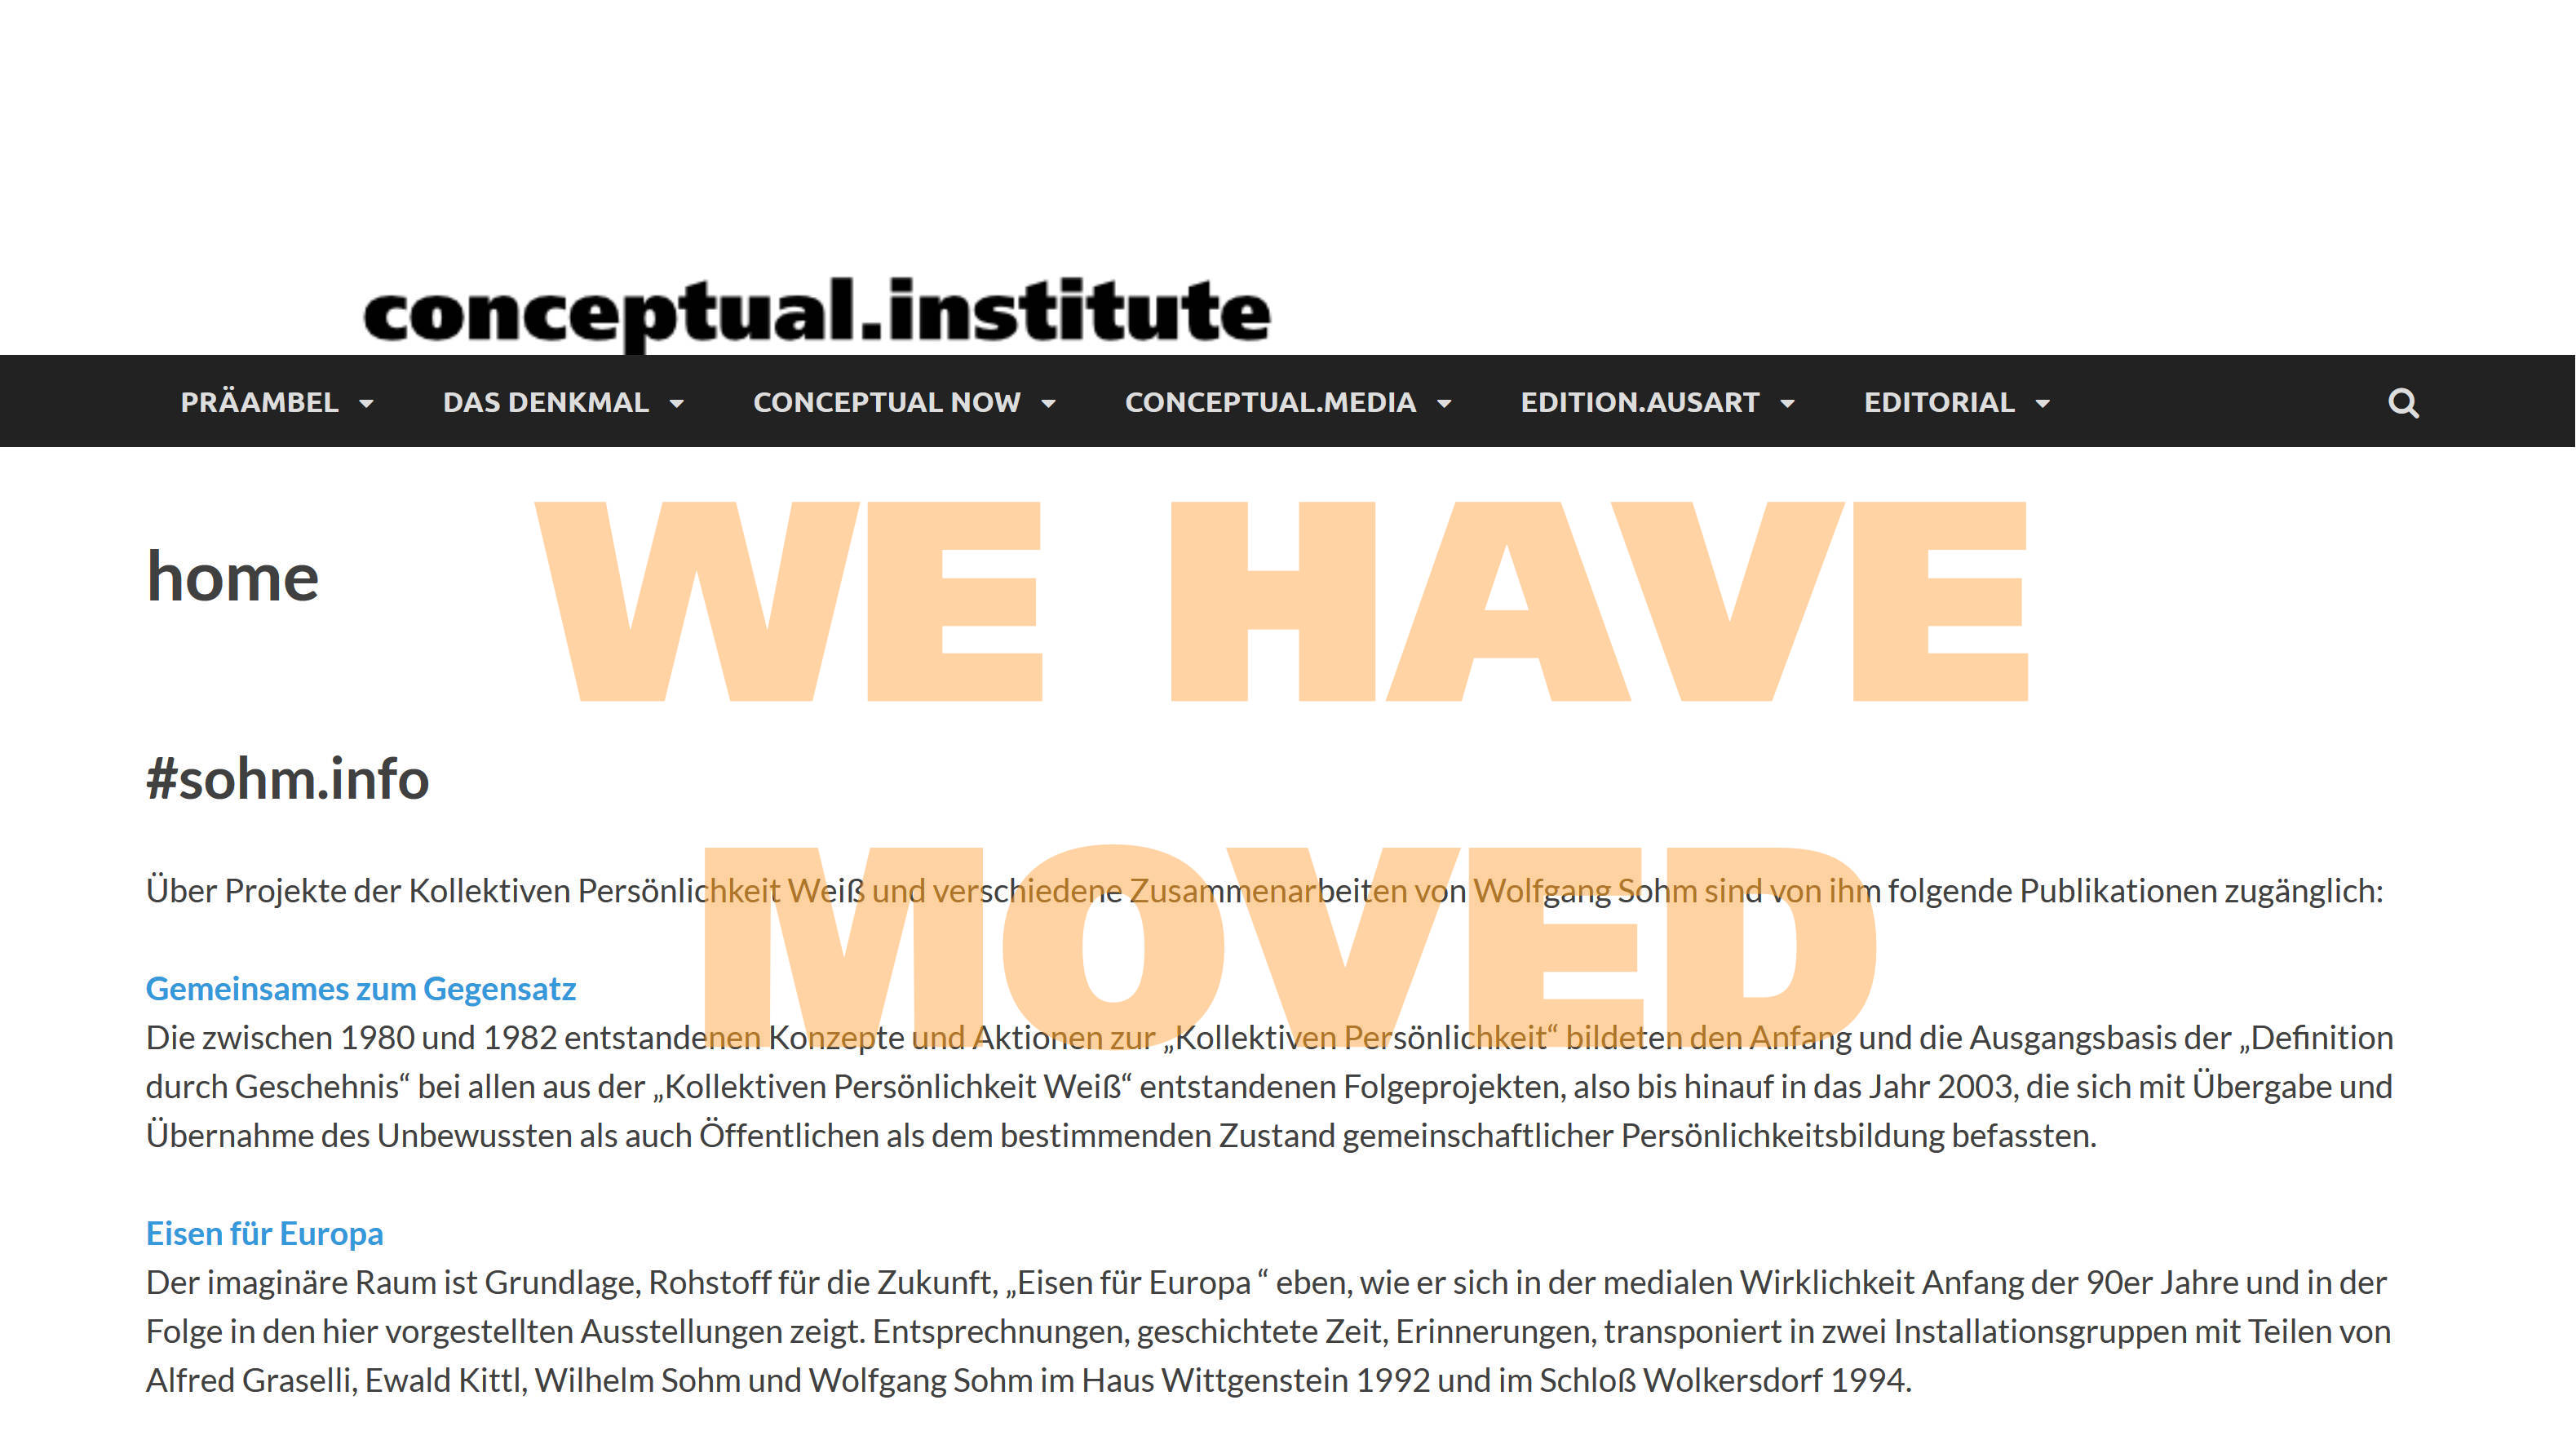 We have moved to www.conceptual.institute